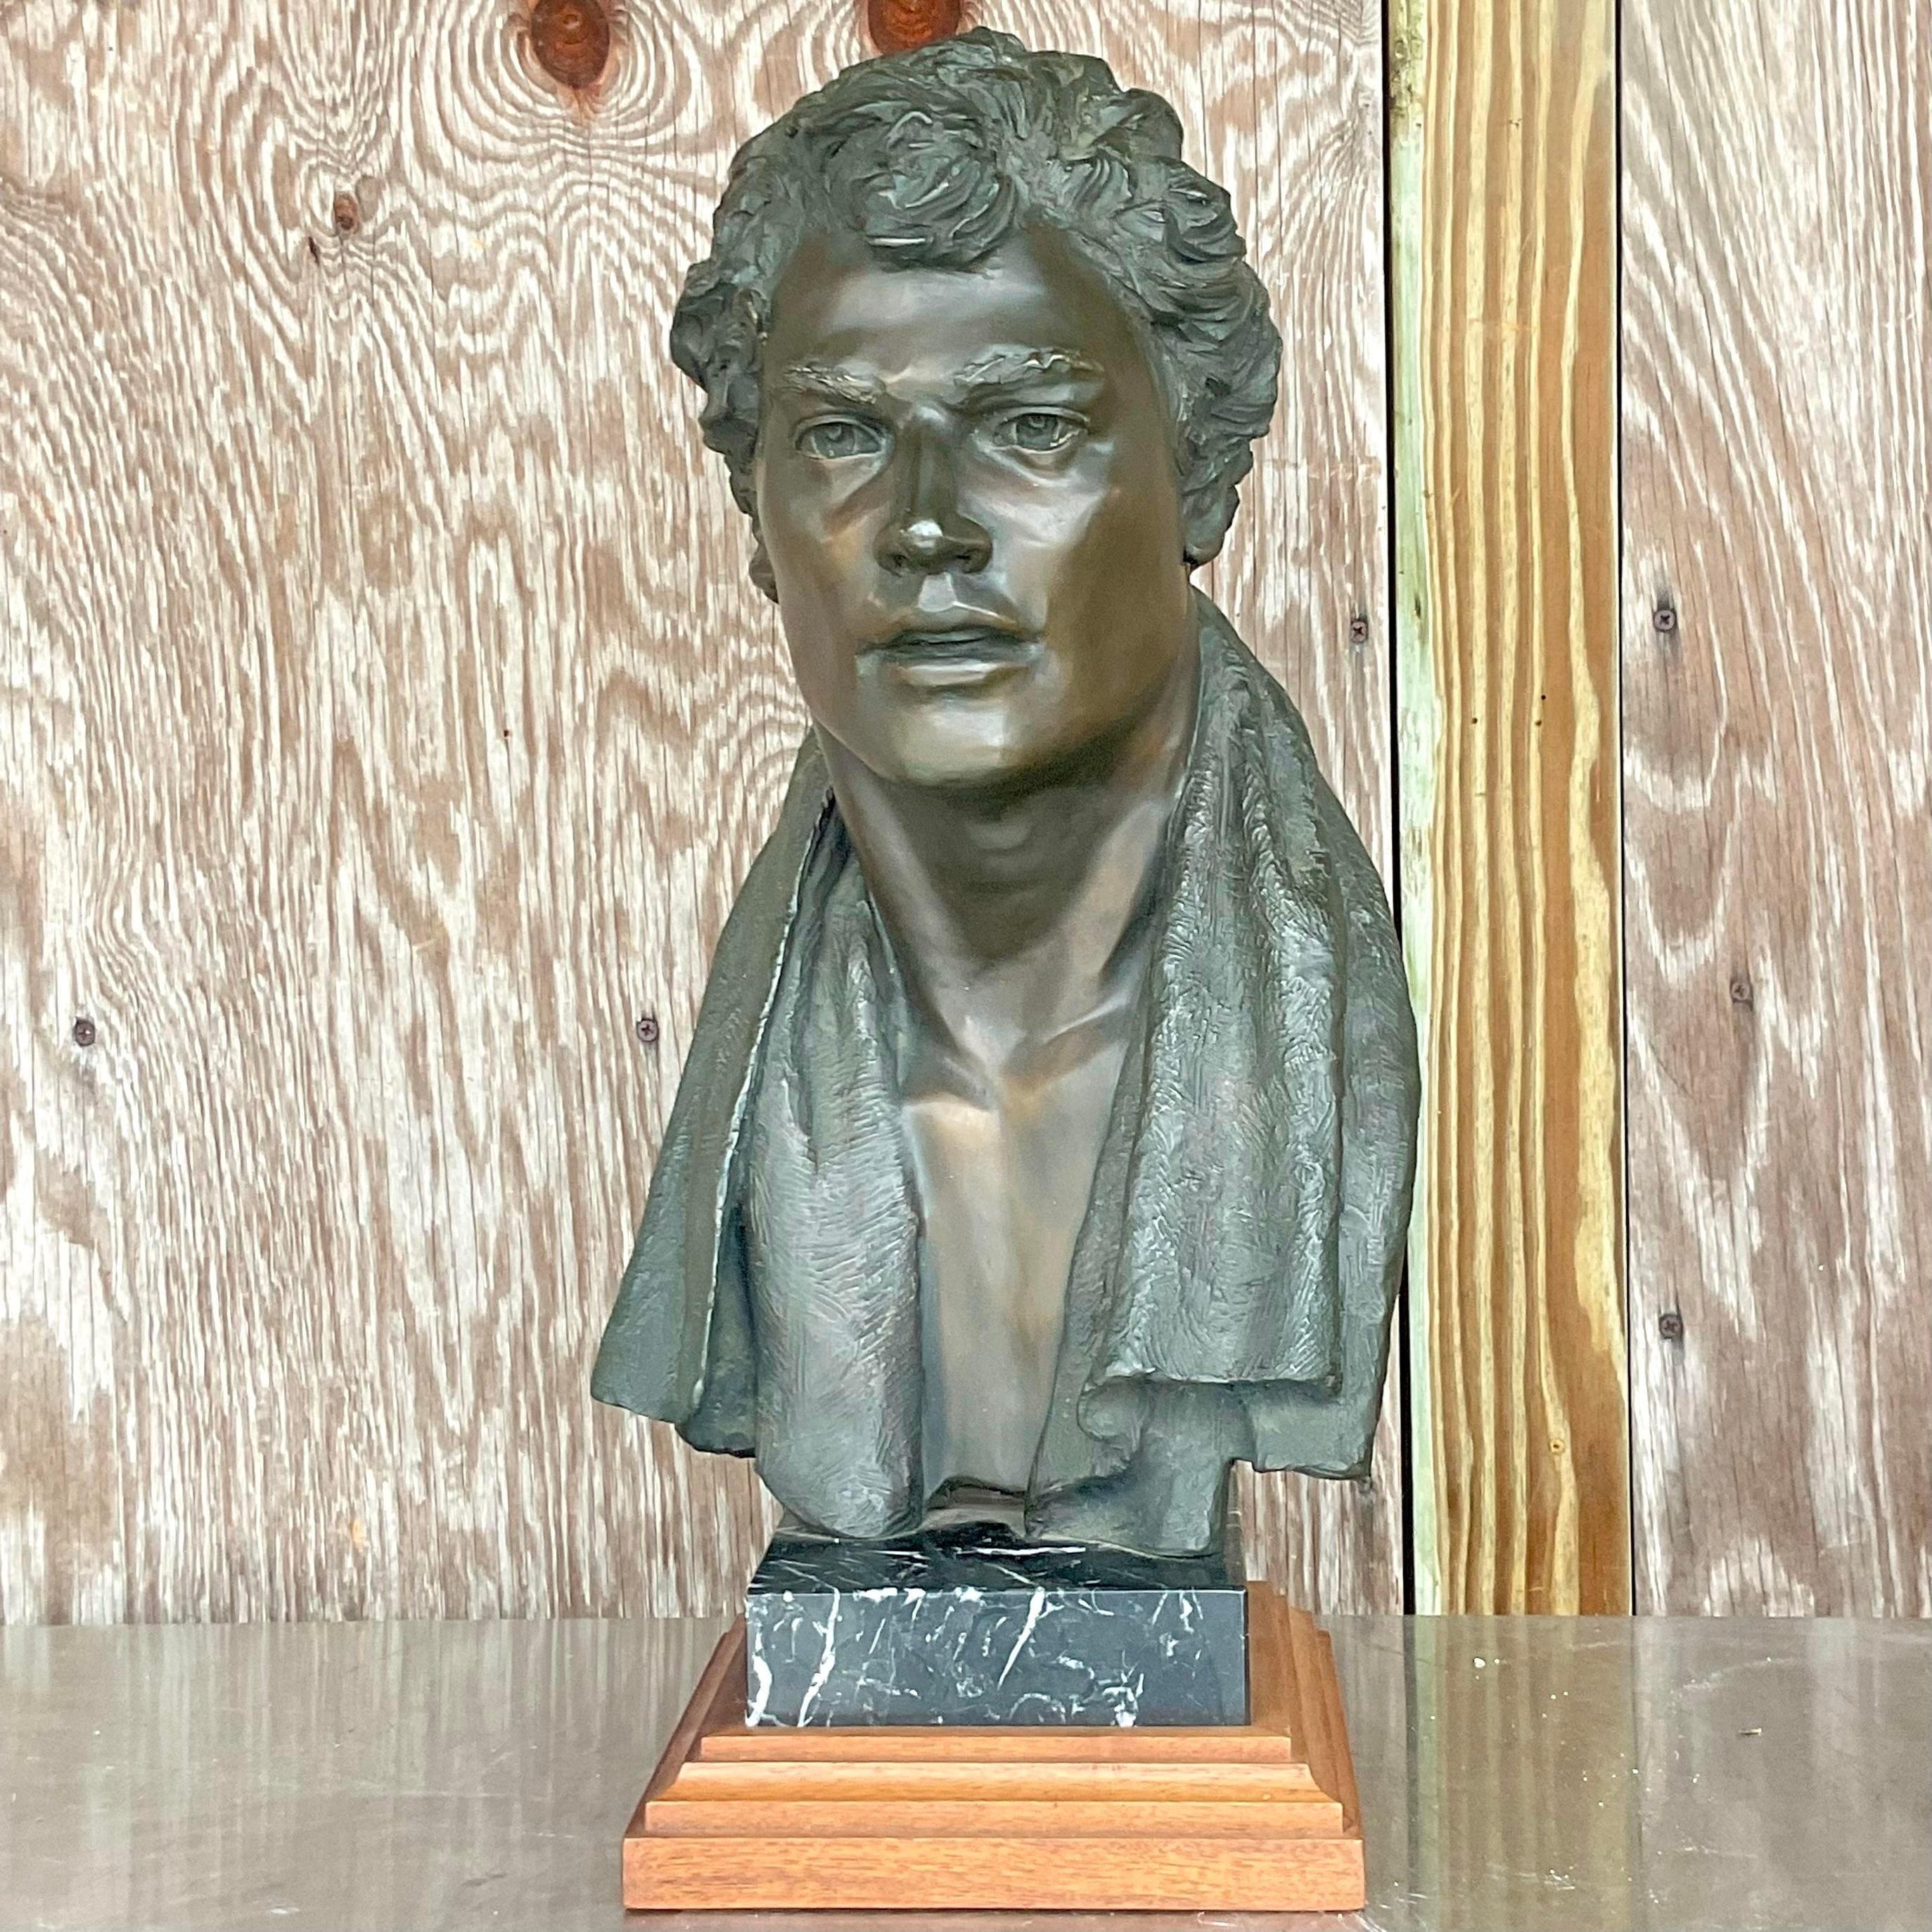 A striking vintage Boho bronze bust of man. A chic profile of a handsome young man. Attributed to the artist Glenda Goodacre. Unsigned. Acquired from a Palm Beach estate.